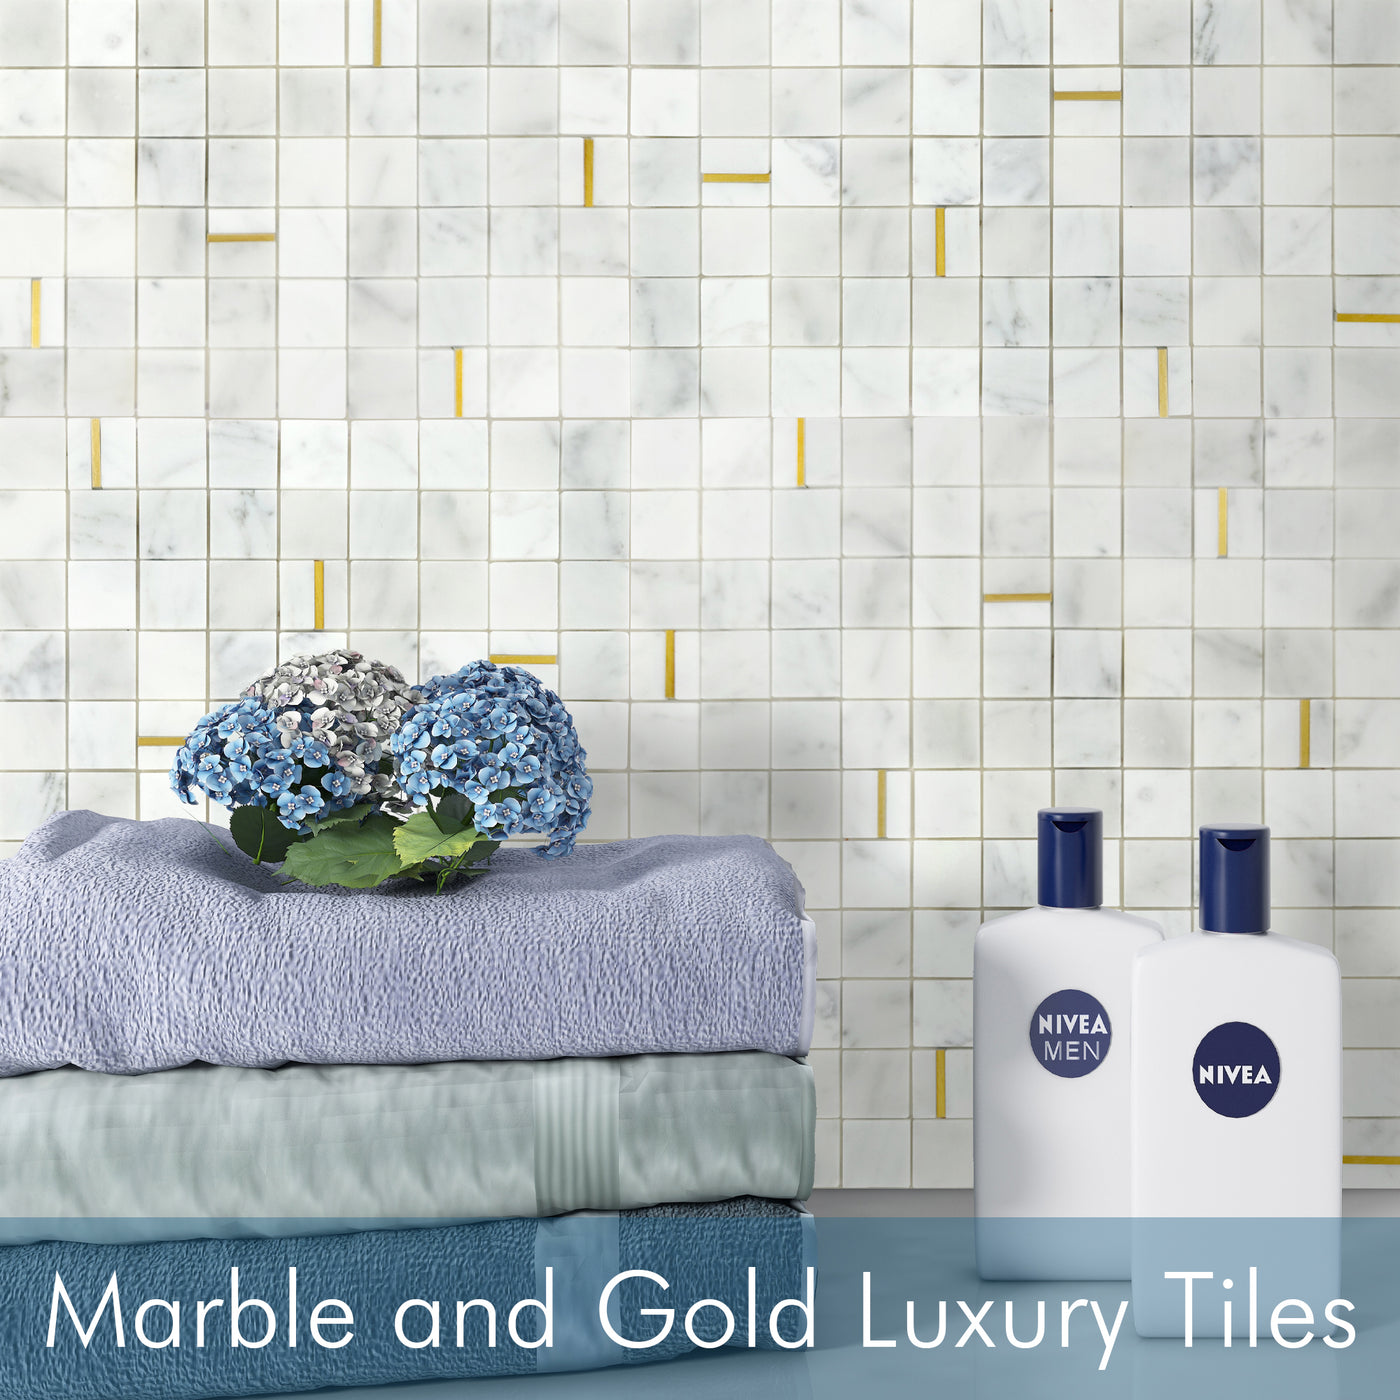 Marble and Gold Luxury Tiles